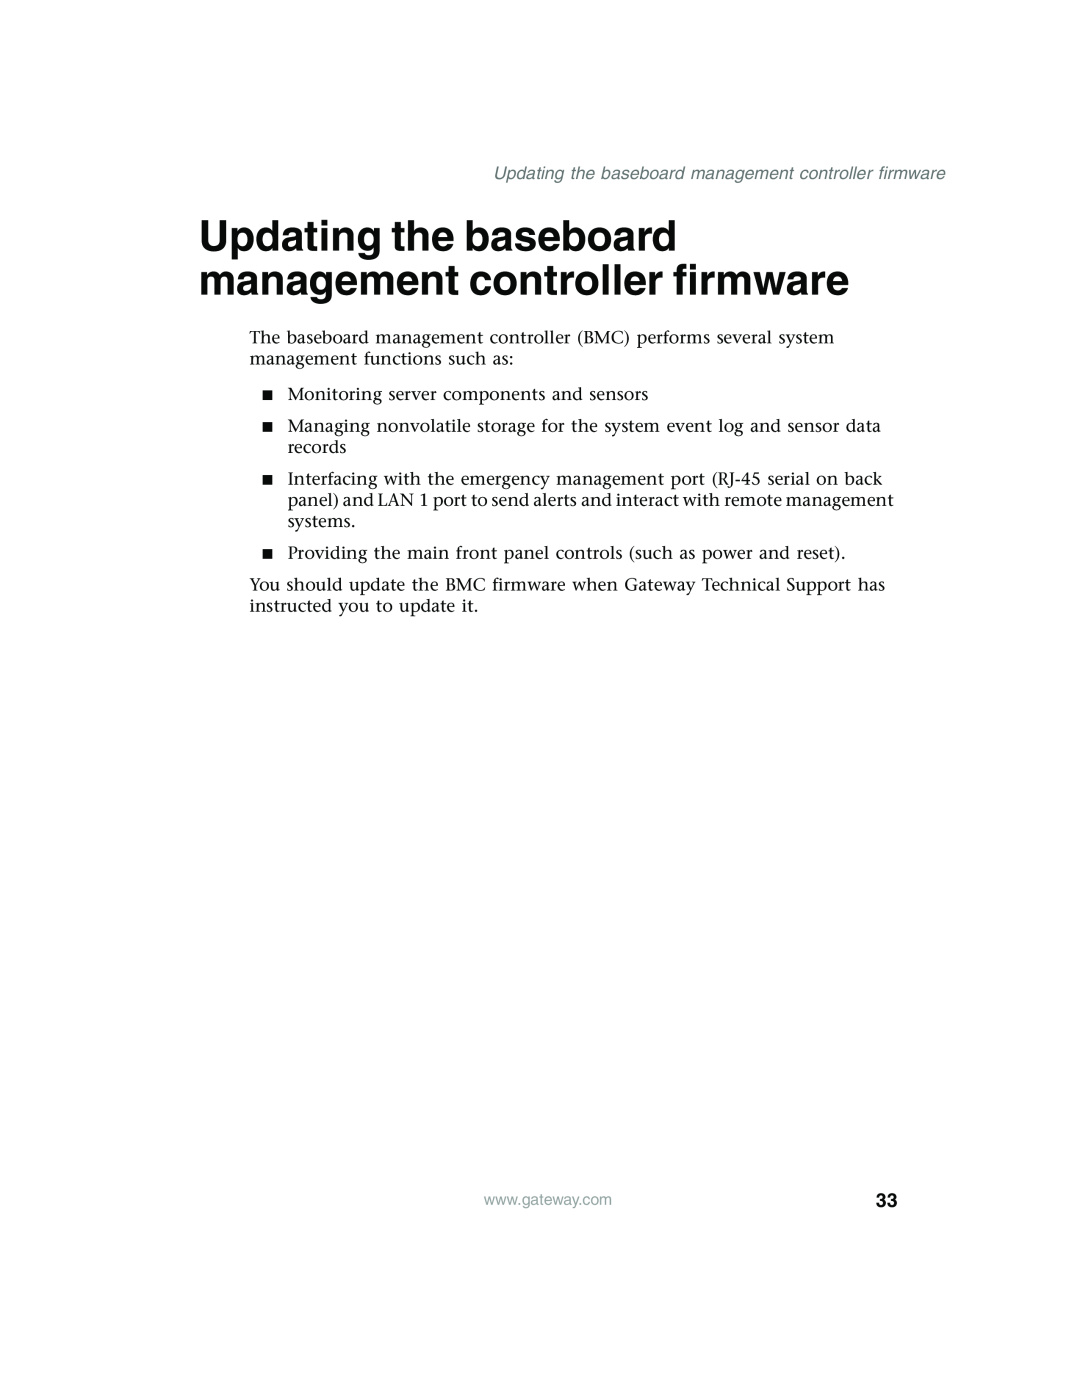 Gateway 955 manual Updating the baseboard management controller firmware 